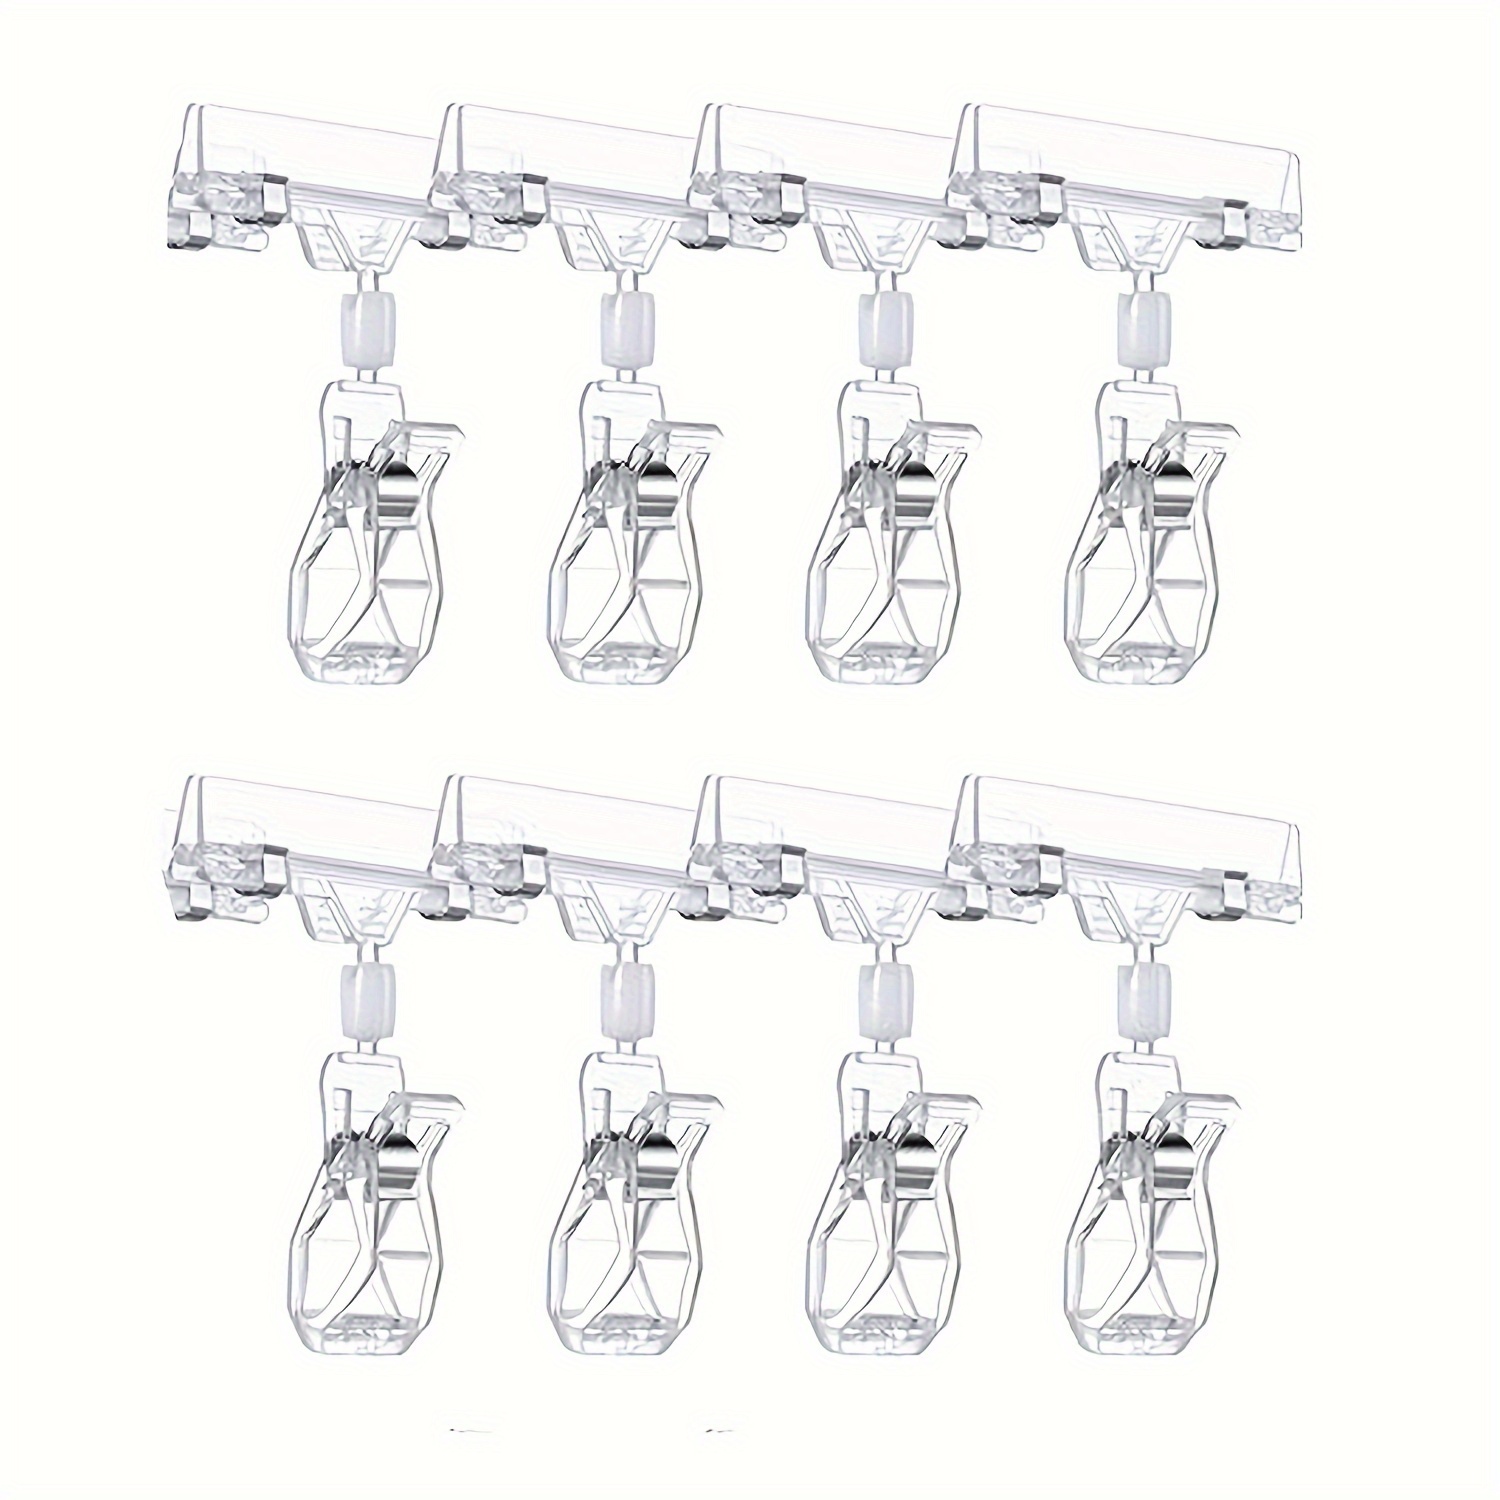 

8pcs Plastic Signage Clip Clear Food Signage Clip Rotary Price Signage Clip Rotatable Price Shelf Clamp Plastic Signage Commodity Signage Holder Dual Display Holder Retail Card